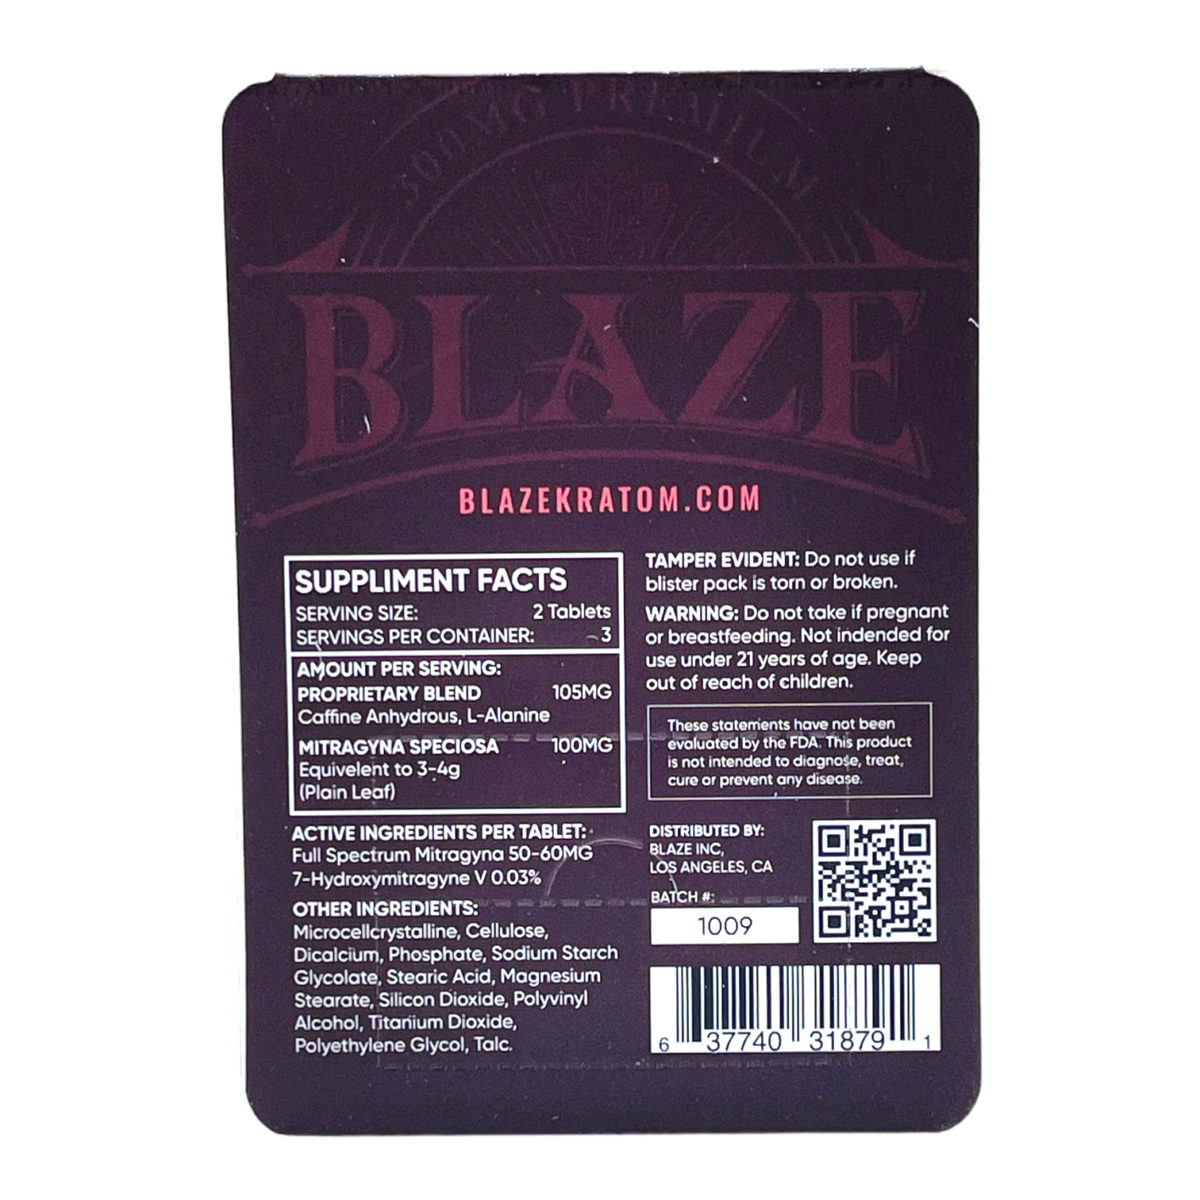 Blaze Red Relaxed Kratom Extract Tablets – 6 count